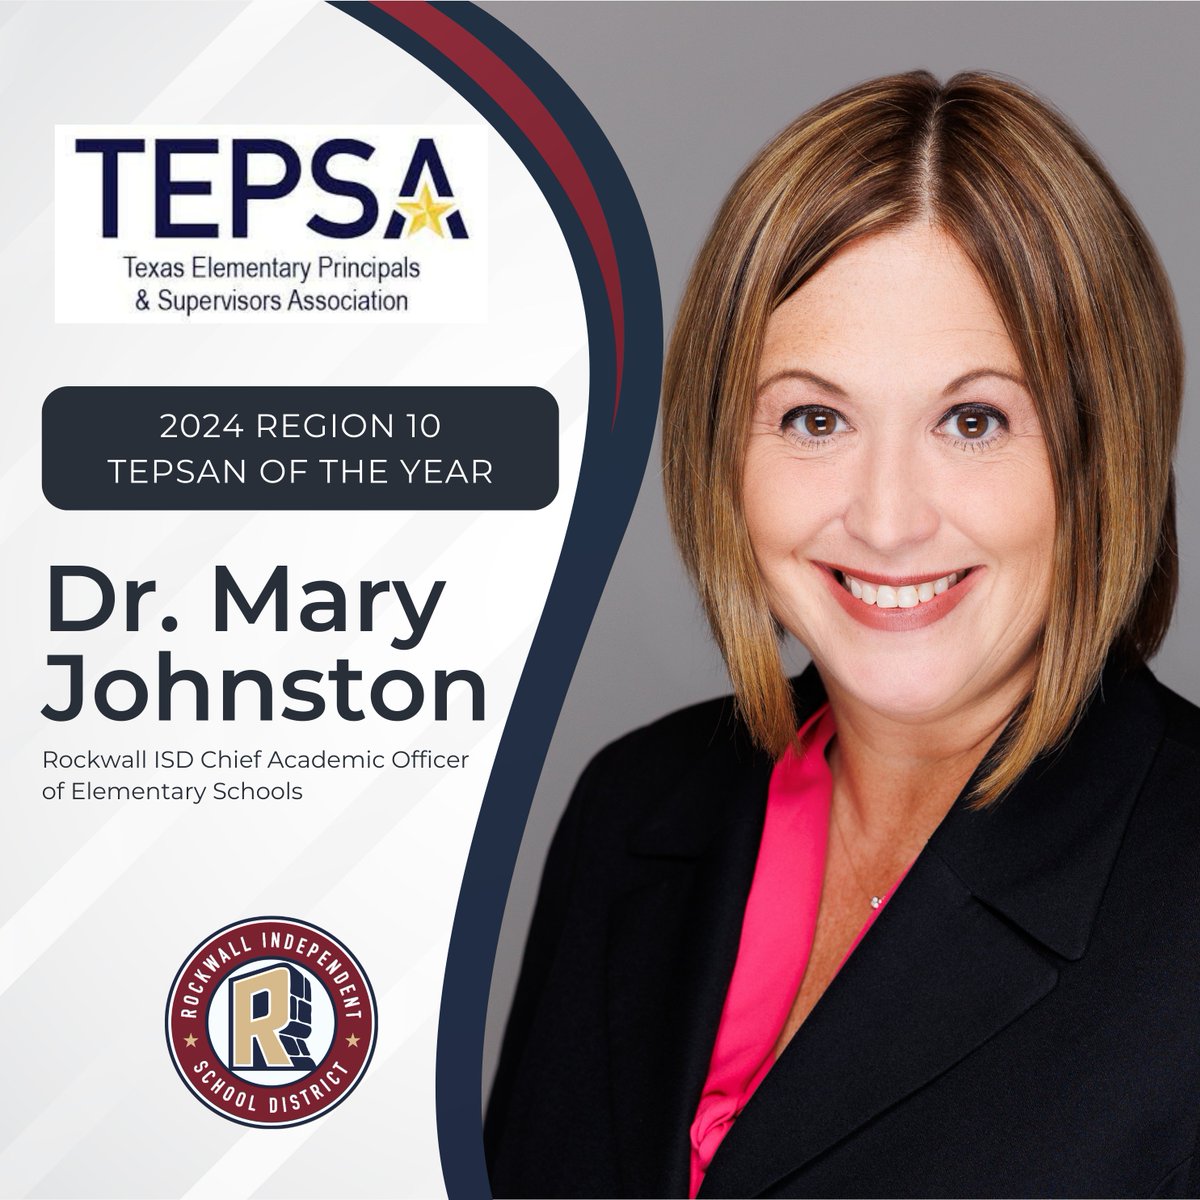 Dr. Mary Johnston, Rockwall ISD Chief Academic Officer of Elementary Schools, has been named the 2024 Region 10 TEPSAN of the Year by @TEPSAtalk. Members from the 20 TEPSA Texas Regions honor a colleague for their outstanding service. Full story here: tinyurl.com/5n937mnc